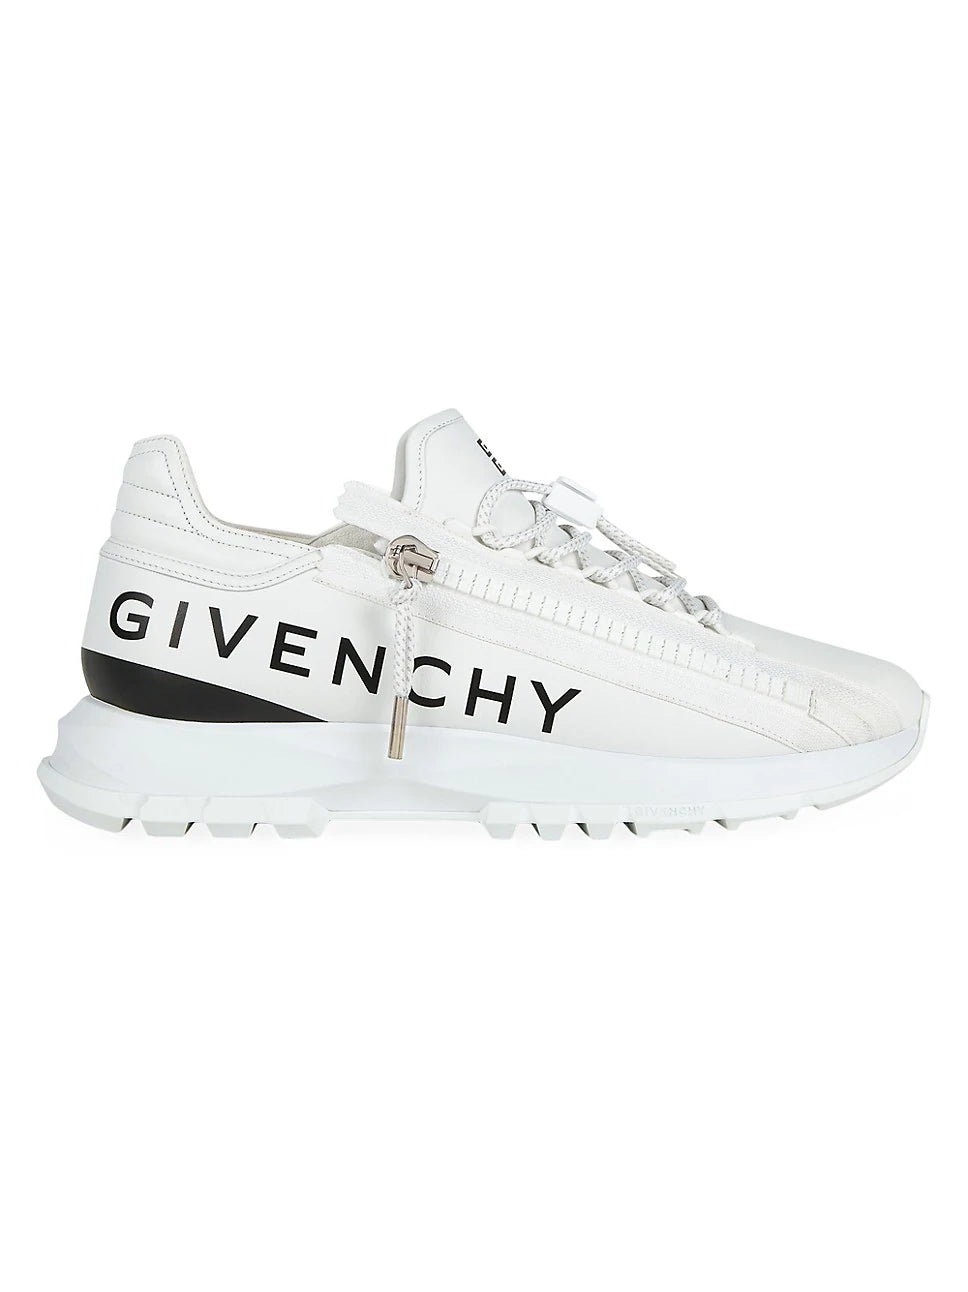 Givenchy Spectre Sneaker